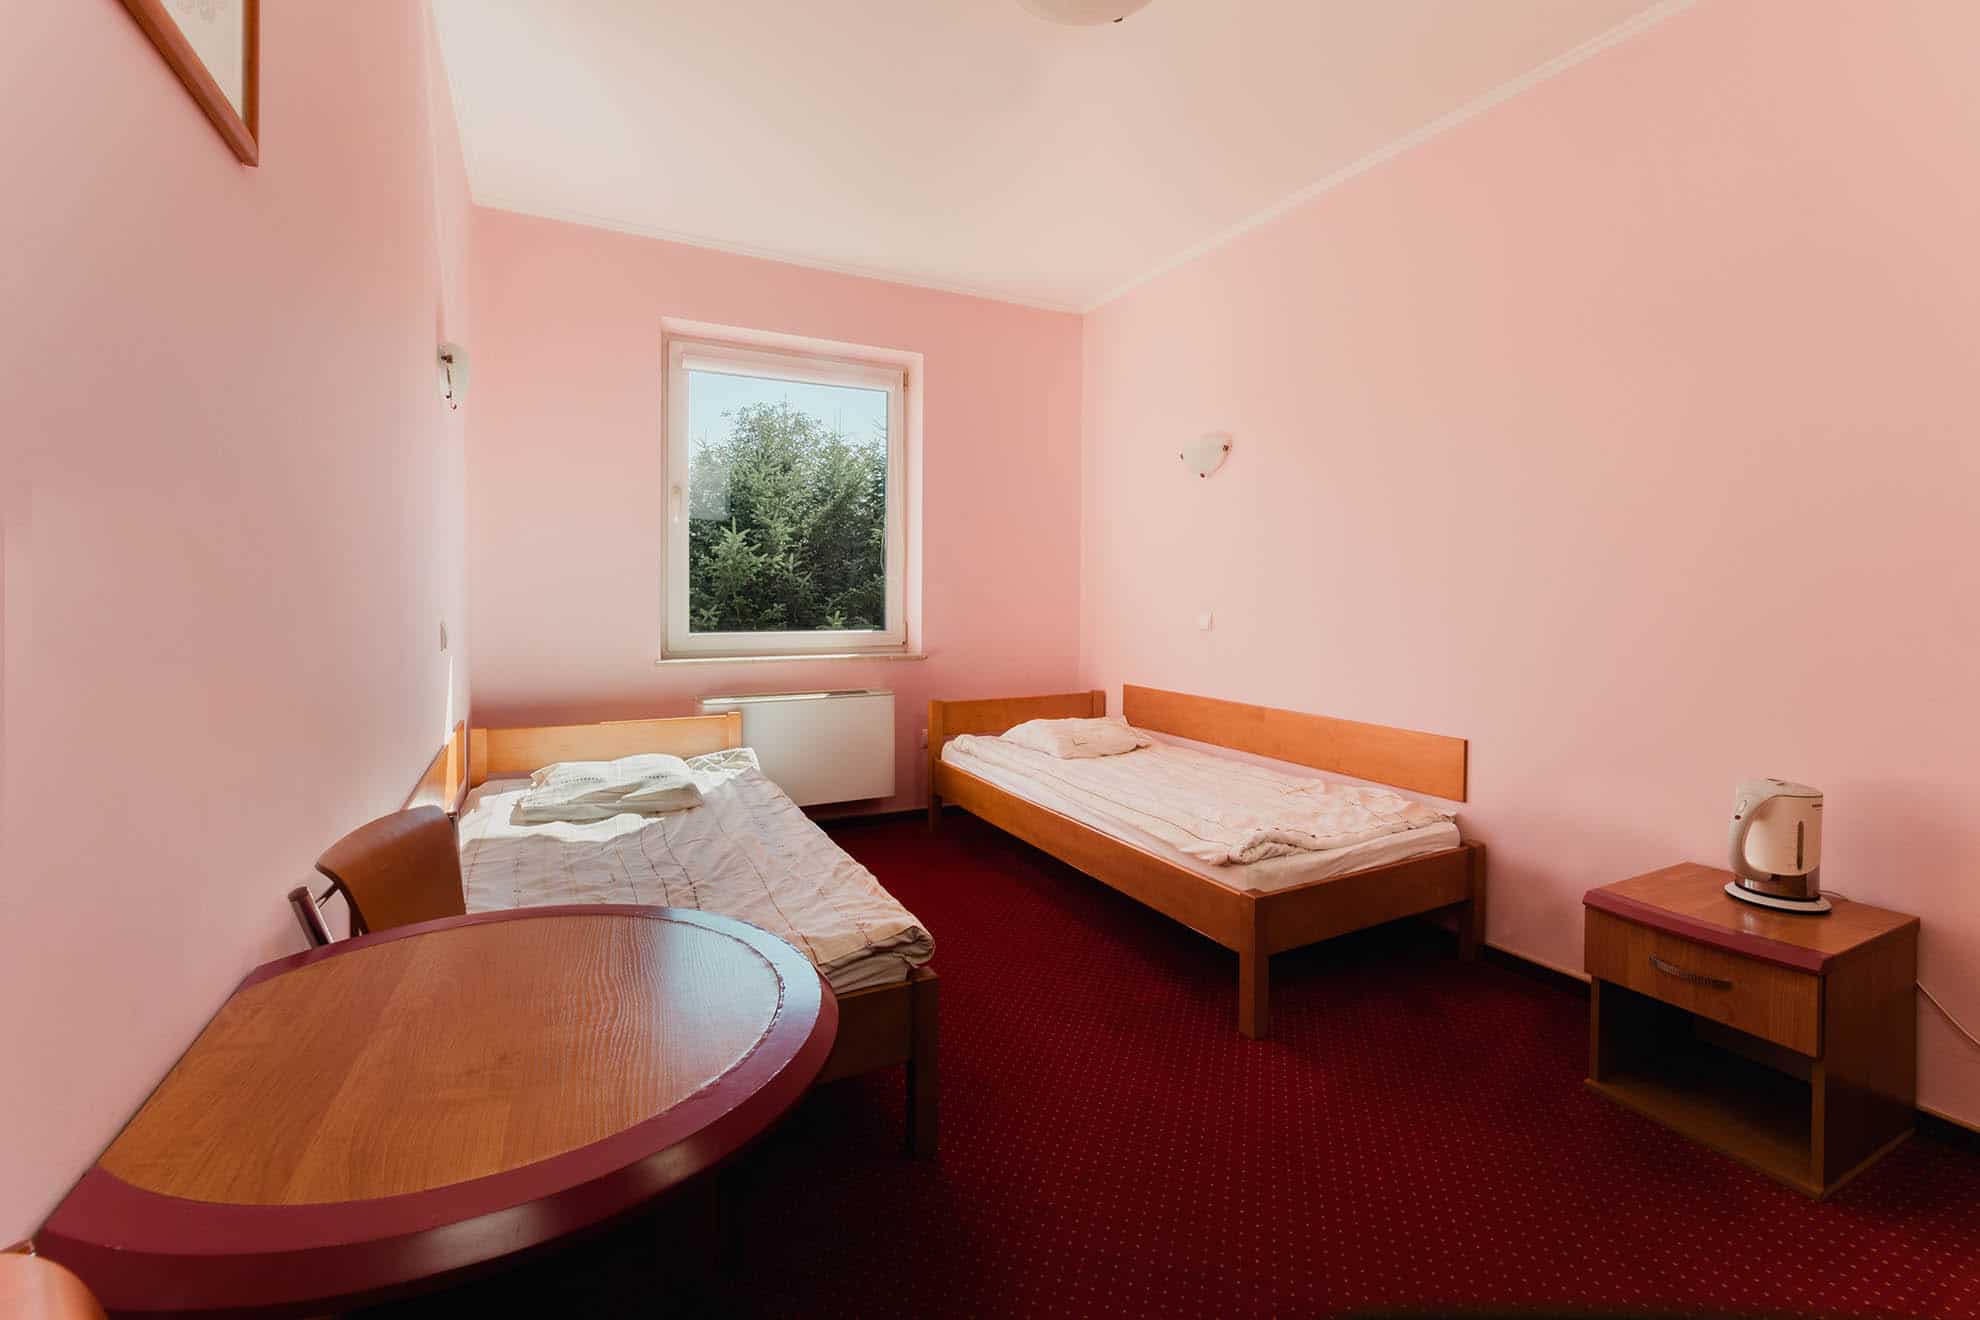 ROOMS Krosno accommodation in the city center, rest in Poland 01